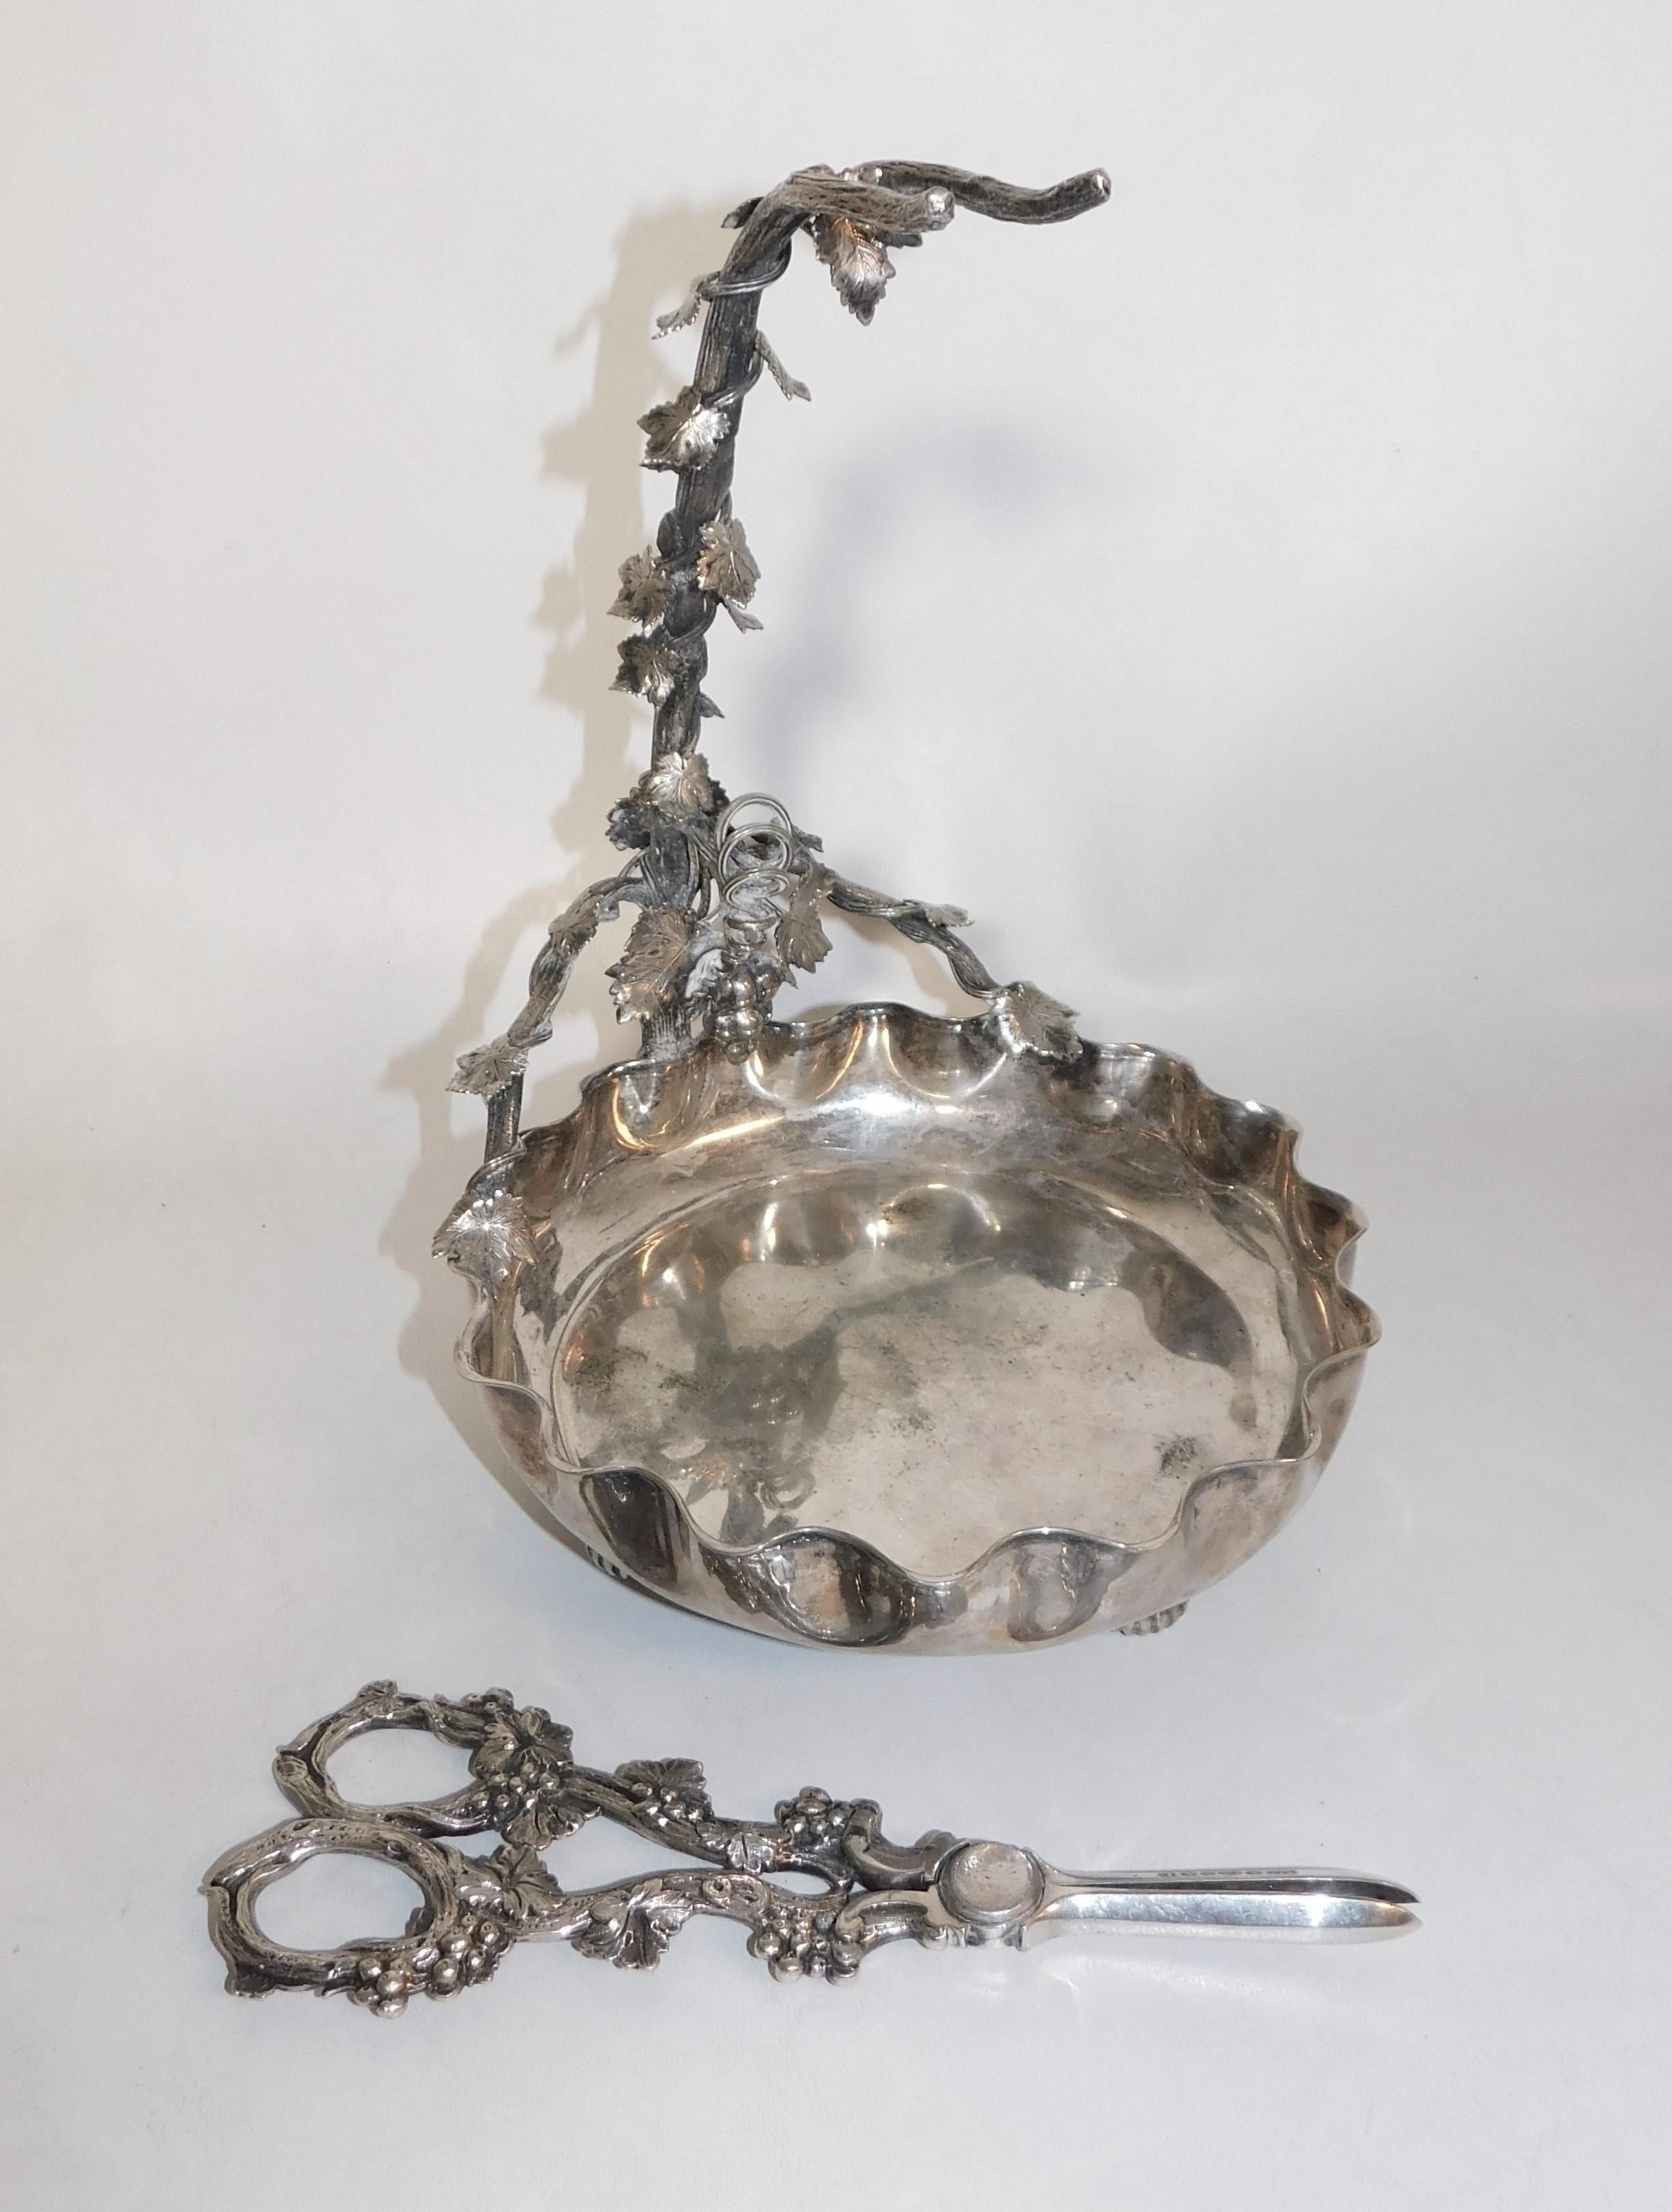 Silver plated Mappin and Webb Princes's plate stand with grape scissor holder on a four footed grape holder base, circa 1890. Shears have a grape and vine design that are marked Mappin Co. S & L (circa 1860).

Mappin & Webb History

Joseph